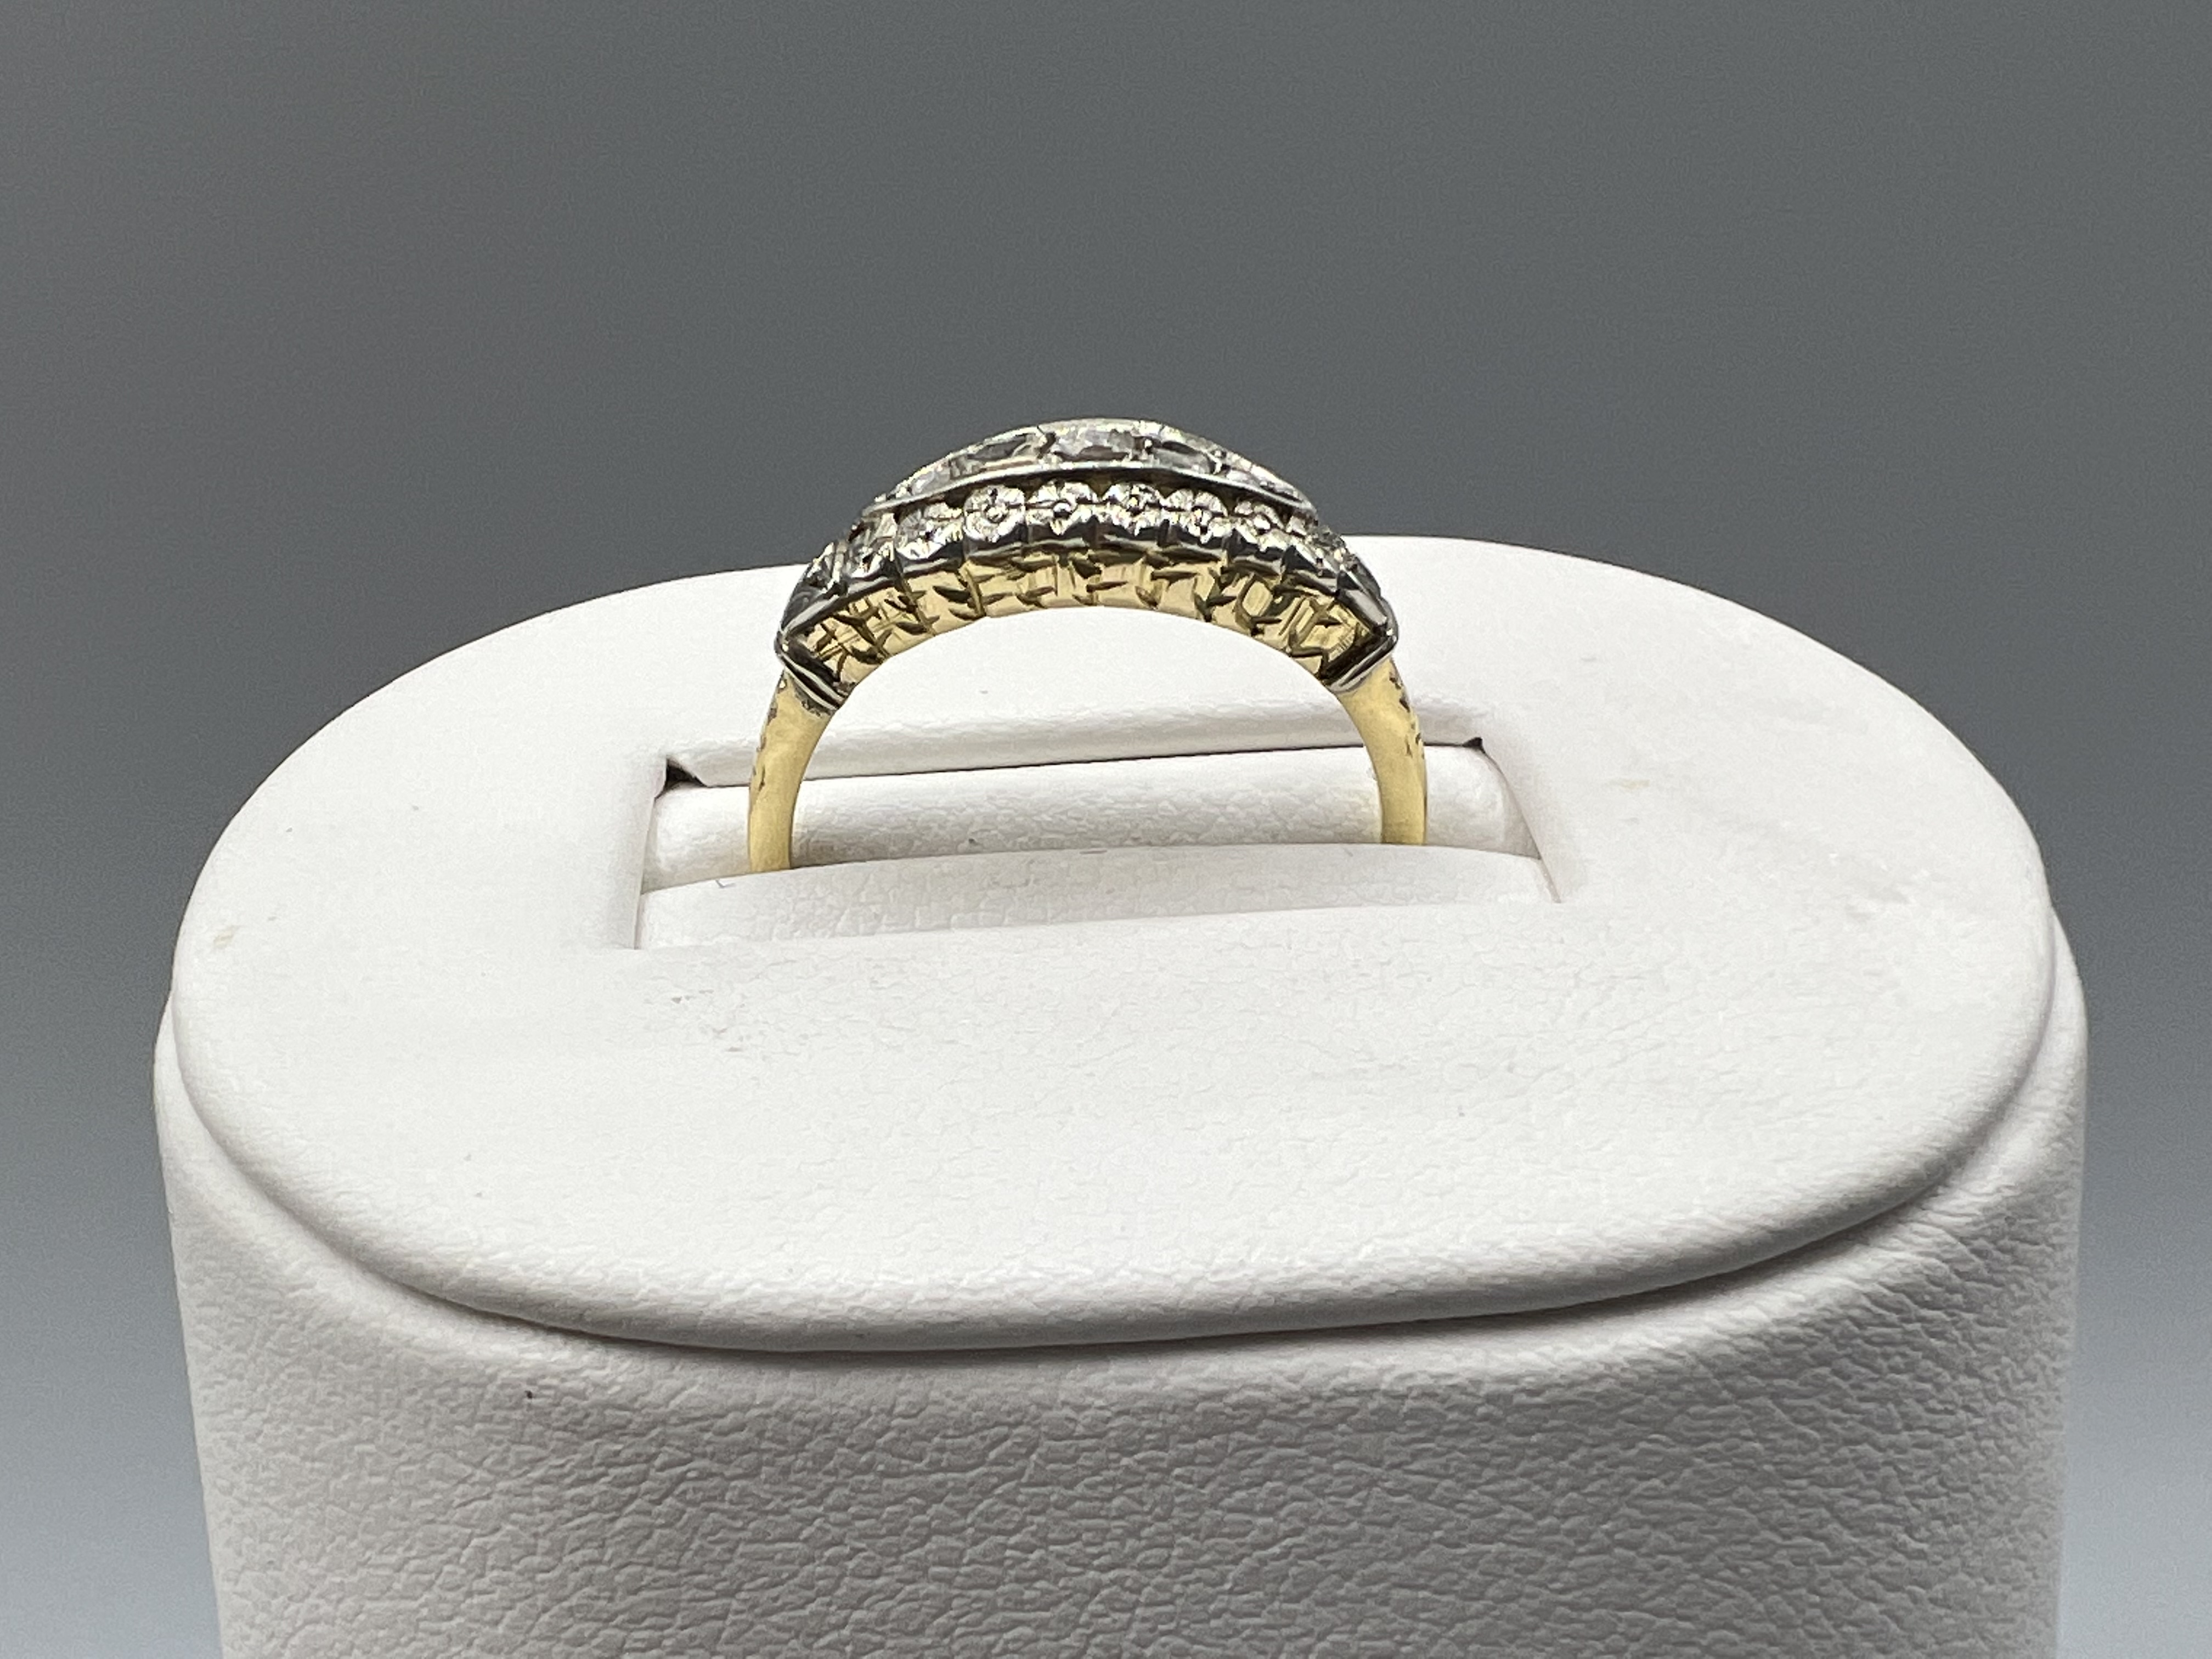 Antique 18ct Gold & Diamond Ring - Size P 2.6g - Image 3 of 3